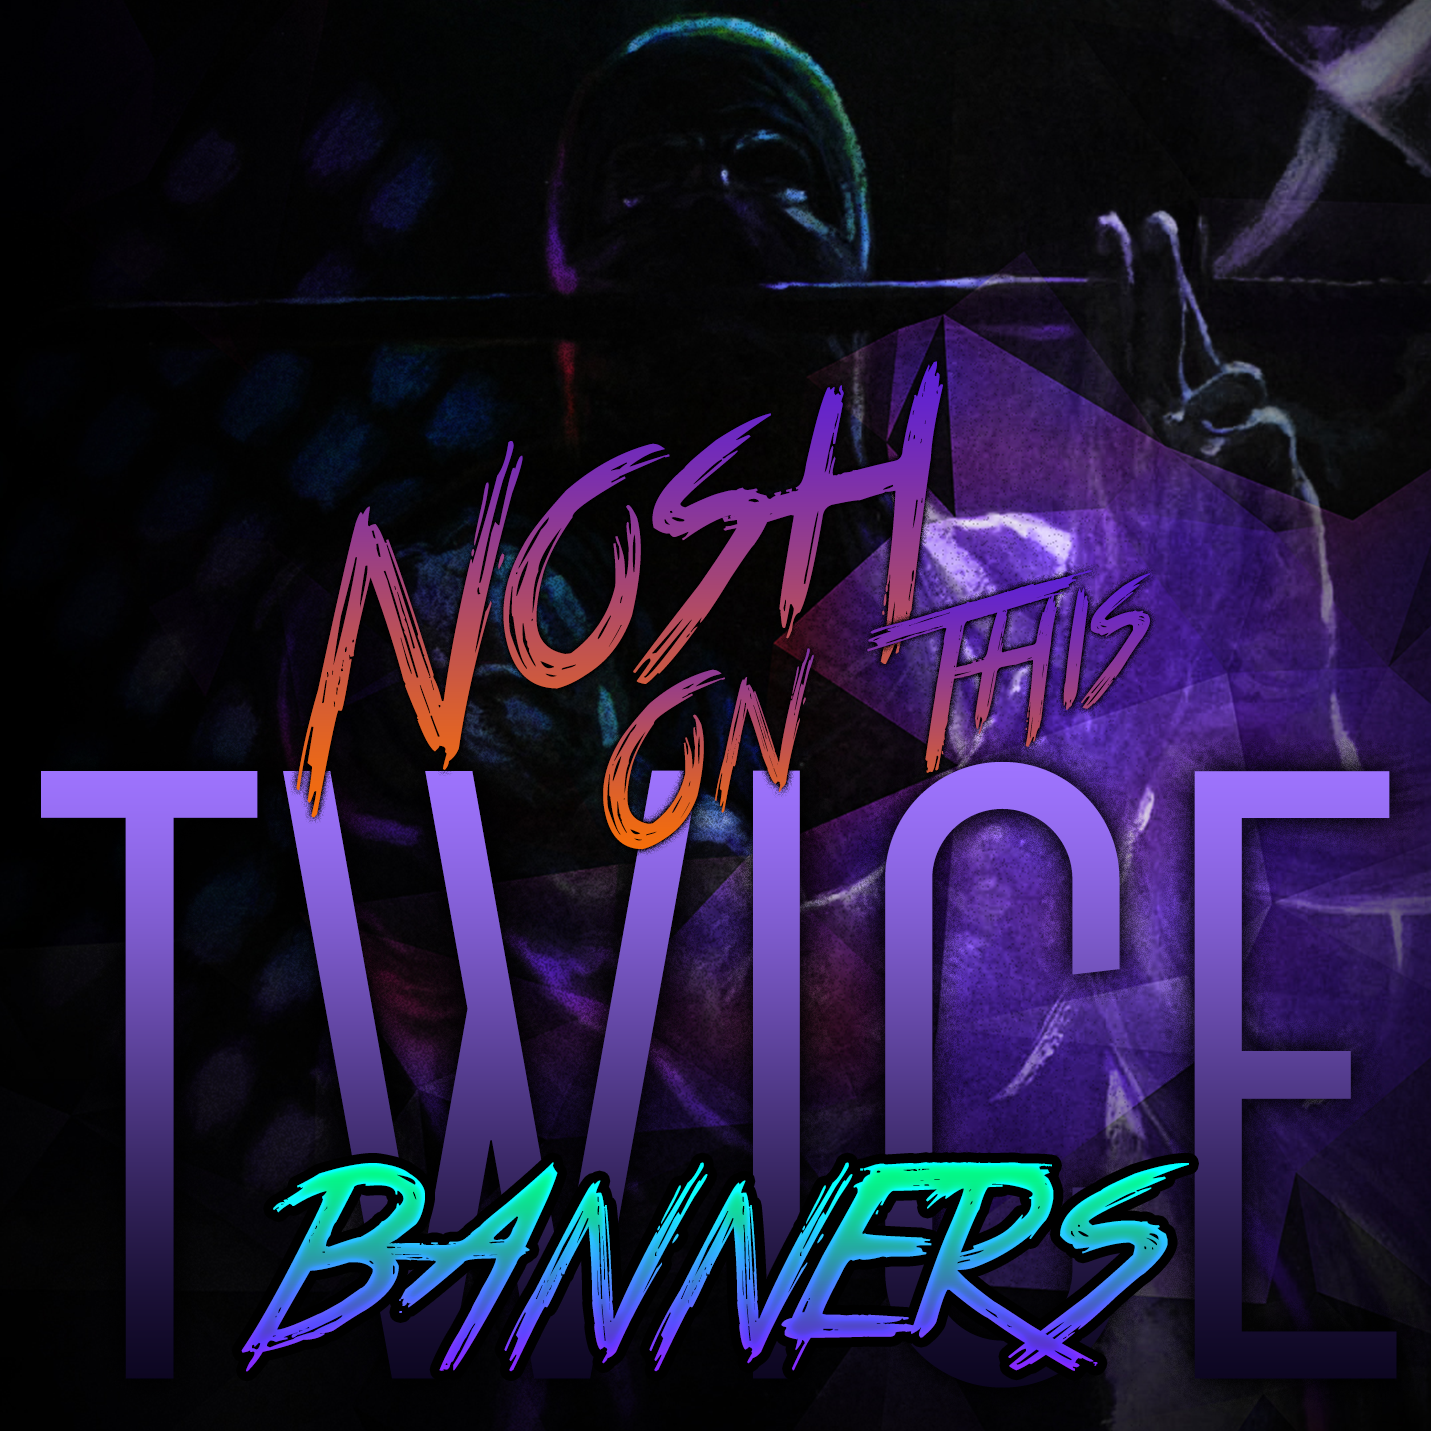 More information about "Nosh On This Twice - Platform Banners"